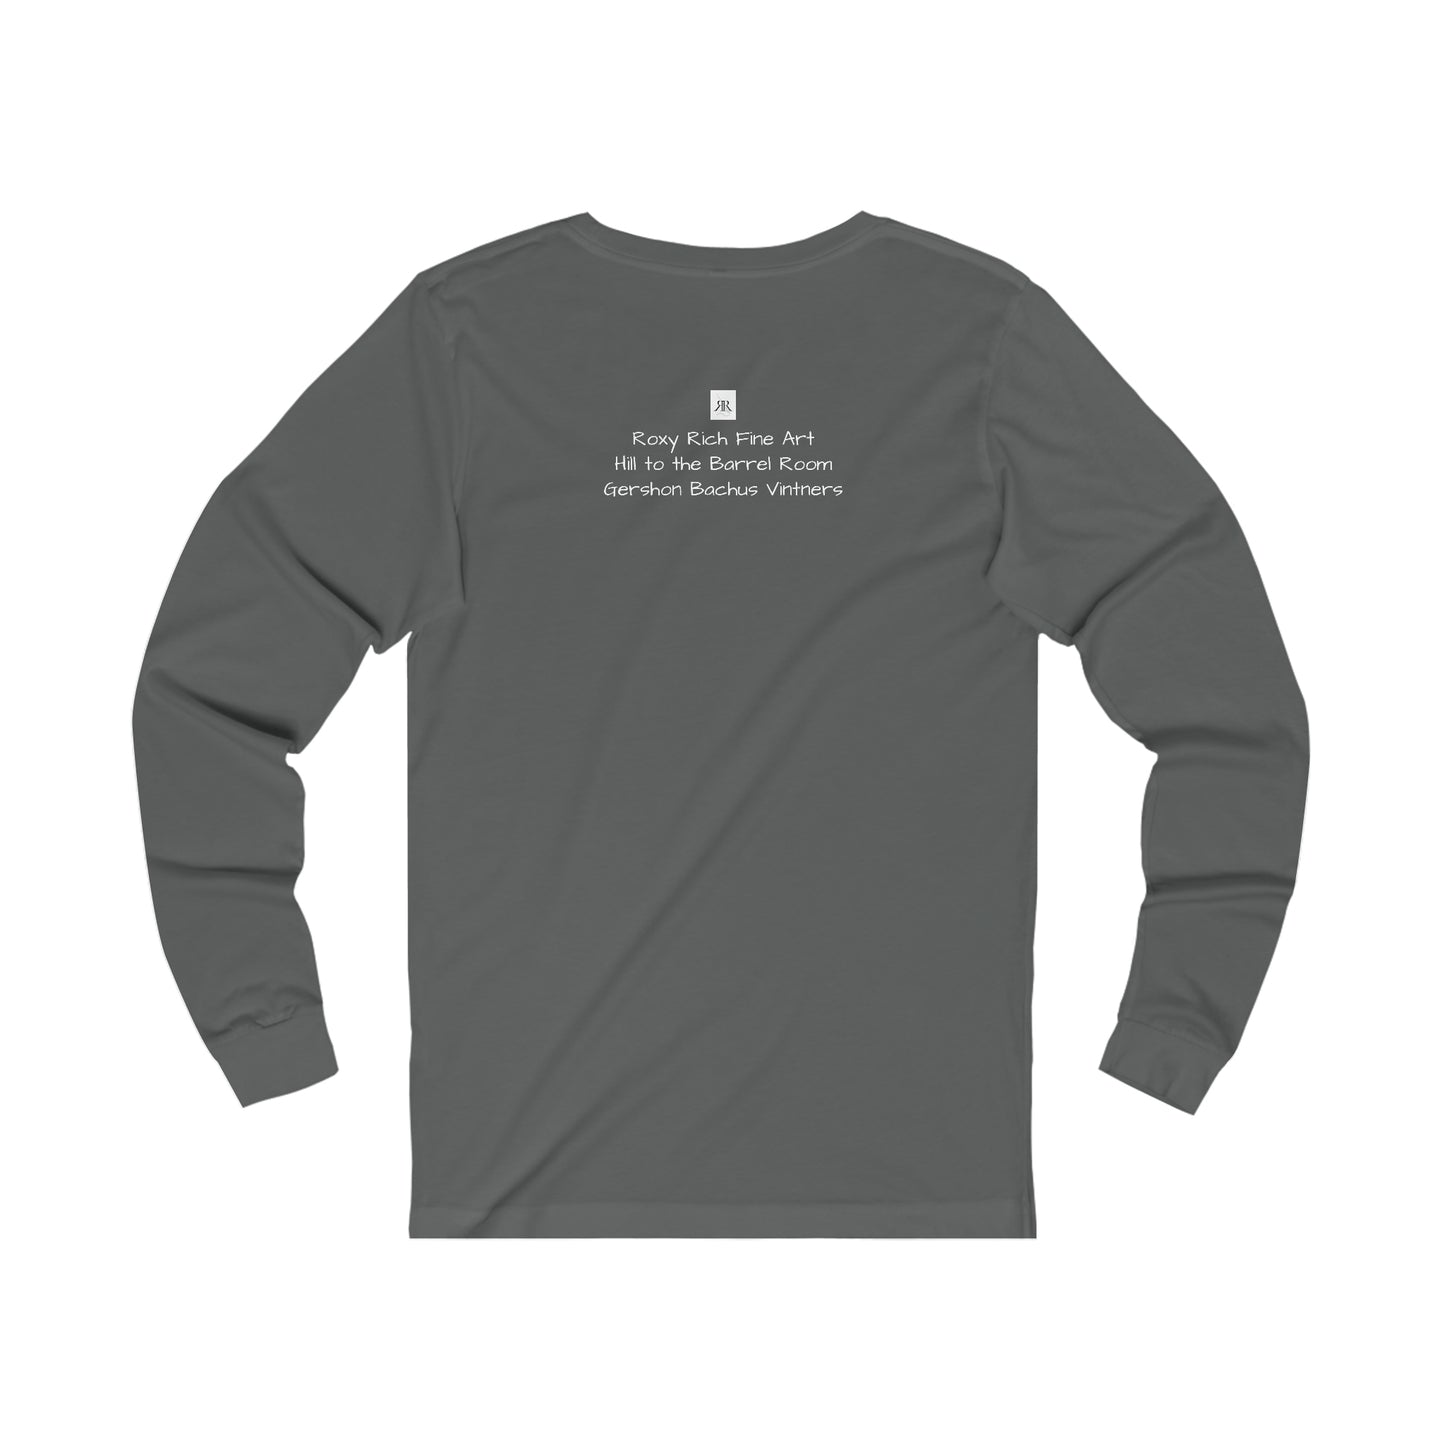 Hill to the Barrel Room at GBV Unisex Jersey Long Sleeve Tee